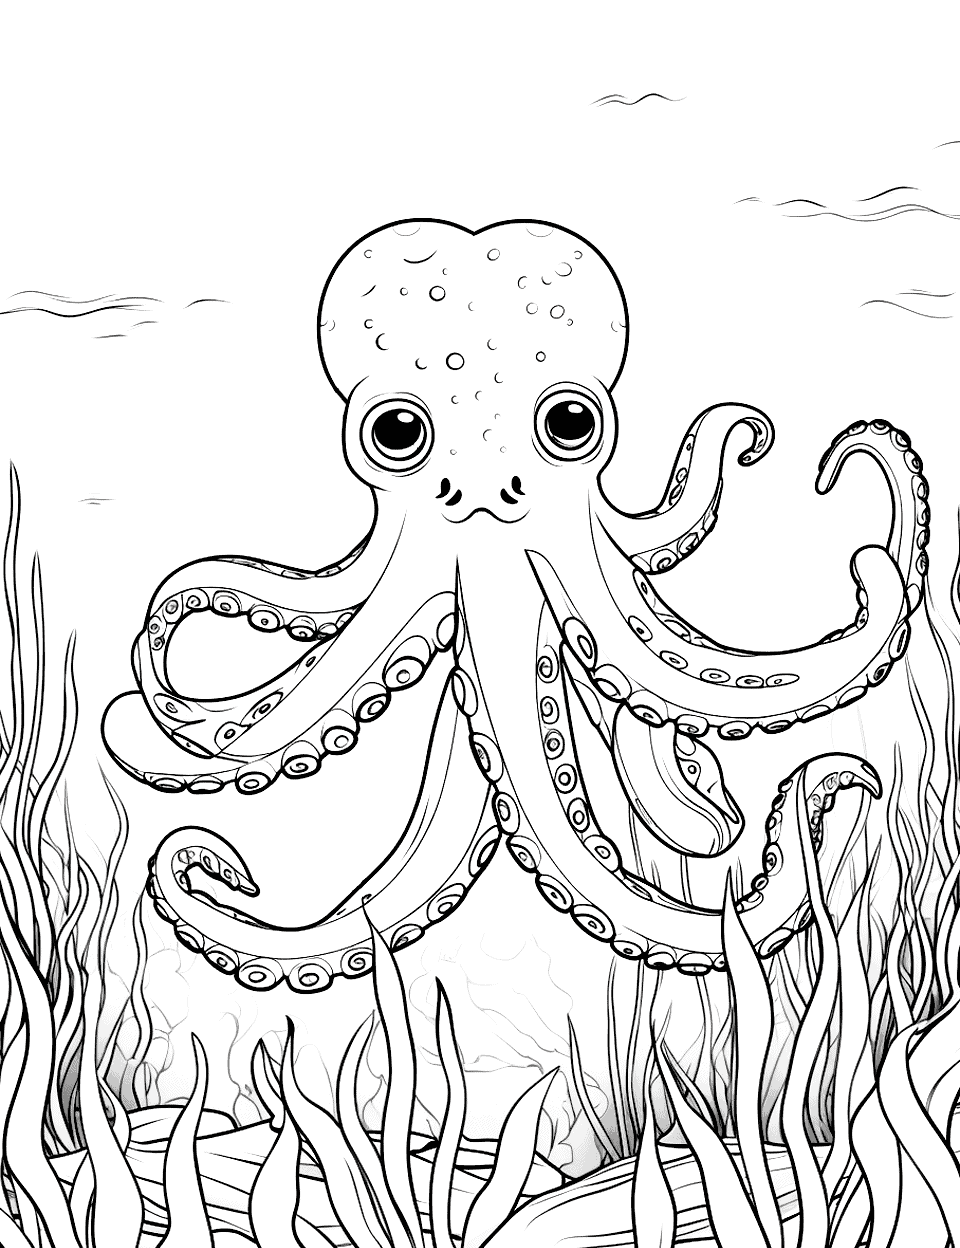 Common Octopus in a Garden of Seaweed Coloring Page - A common octopus trying to camouflage amongst tall seaweed.